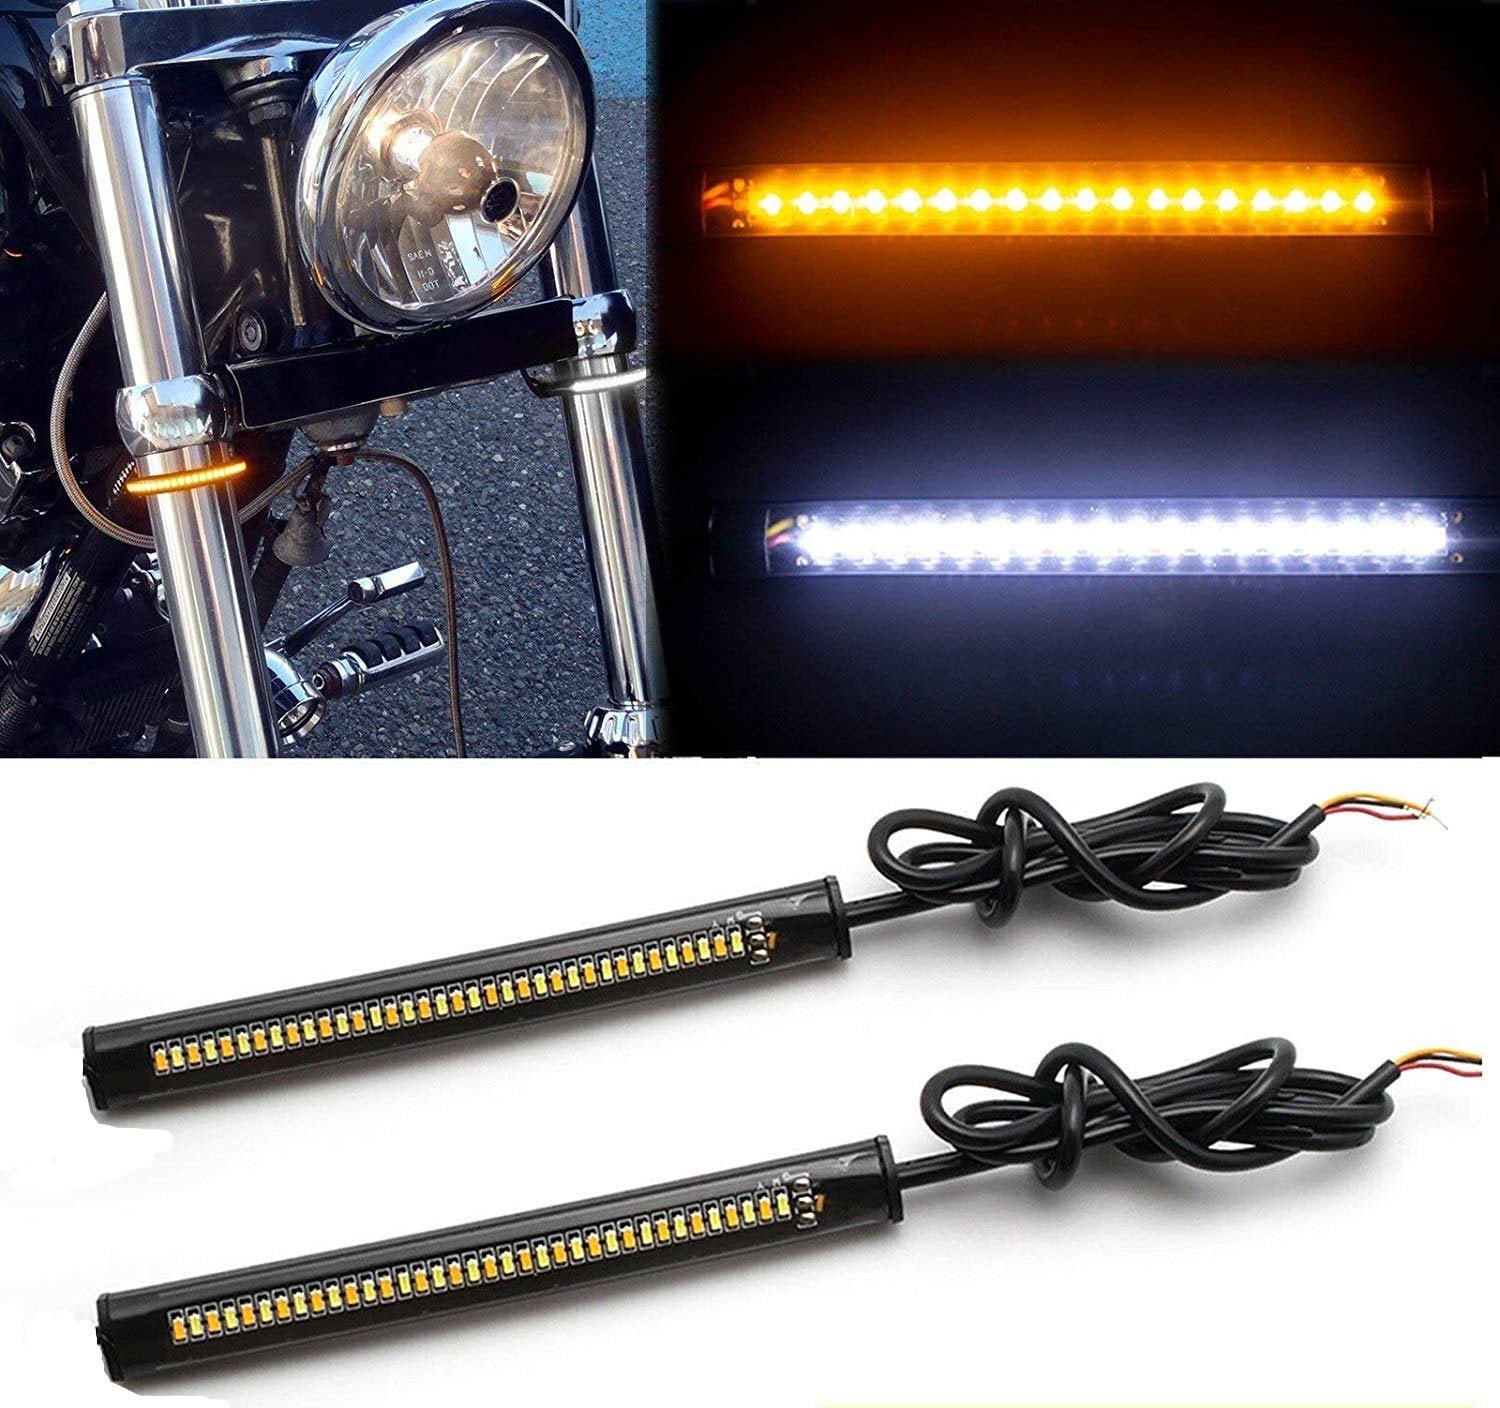 Xotic Tech Smoked Turn Signal Indicator Blinker LED Light Lamps for Motorcycle Motorbike 10-SMD Amber 